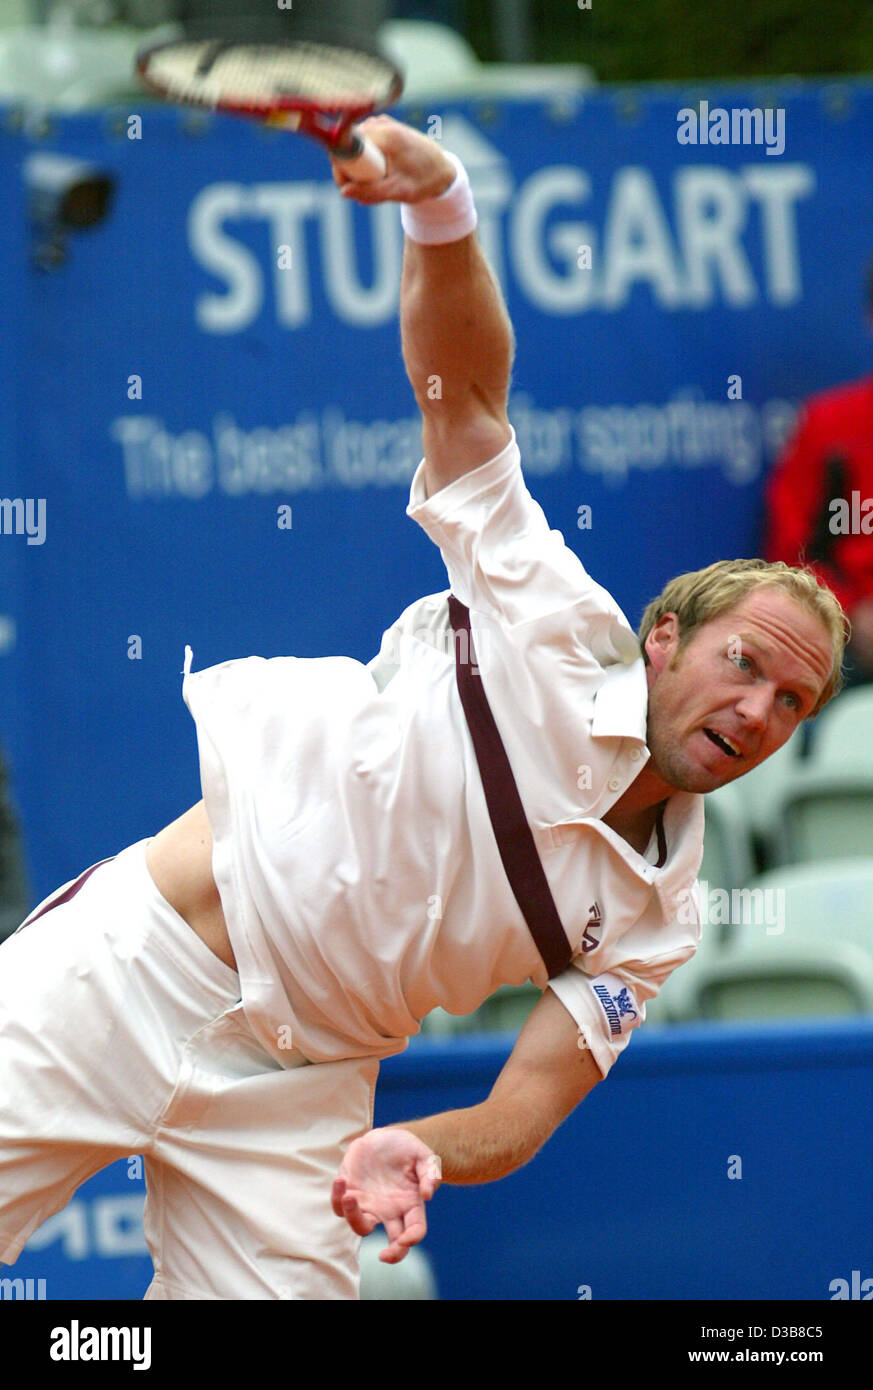 (dpa) - German tennis pro Rainer Schuettler serves in his match against Russian Michail Juschni at the 'Stuttgarter Weissenhof Tennis Tournament' in Stuttgart, Germany, 20 July 2005. The sand court specialists play for a price money of 614,750 euros and a sports car at the 27th 'Stuttgarter Weissenh Stock Photo